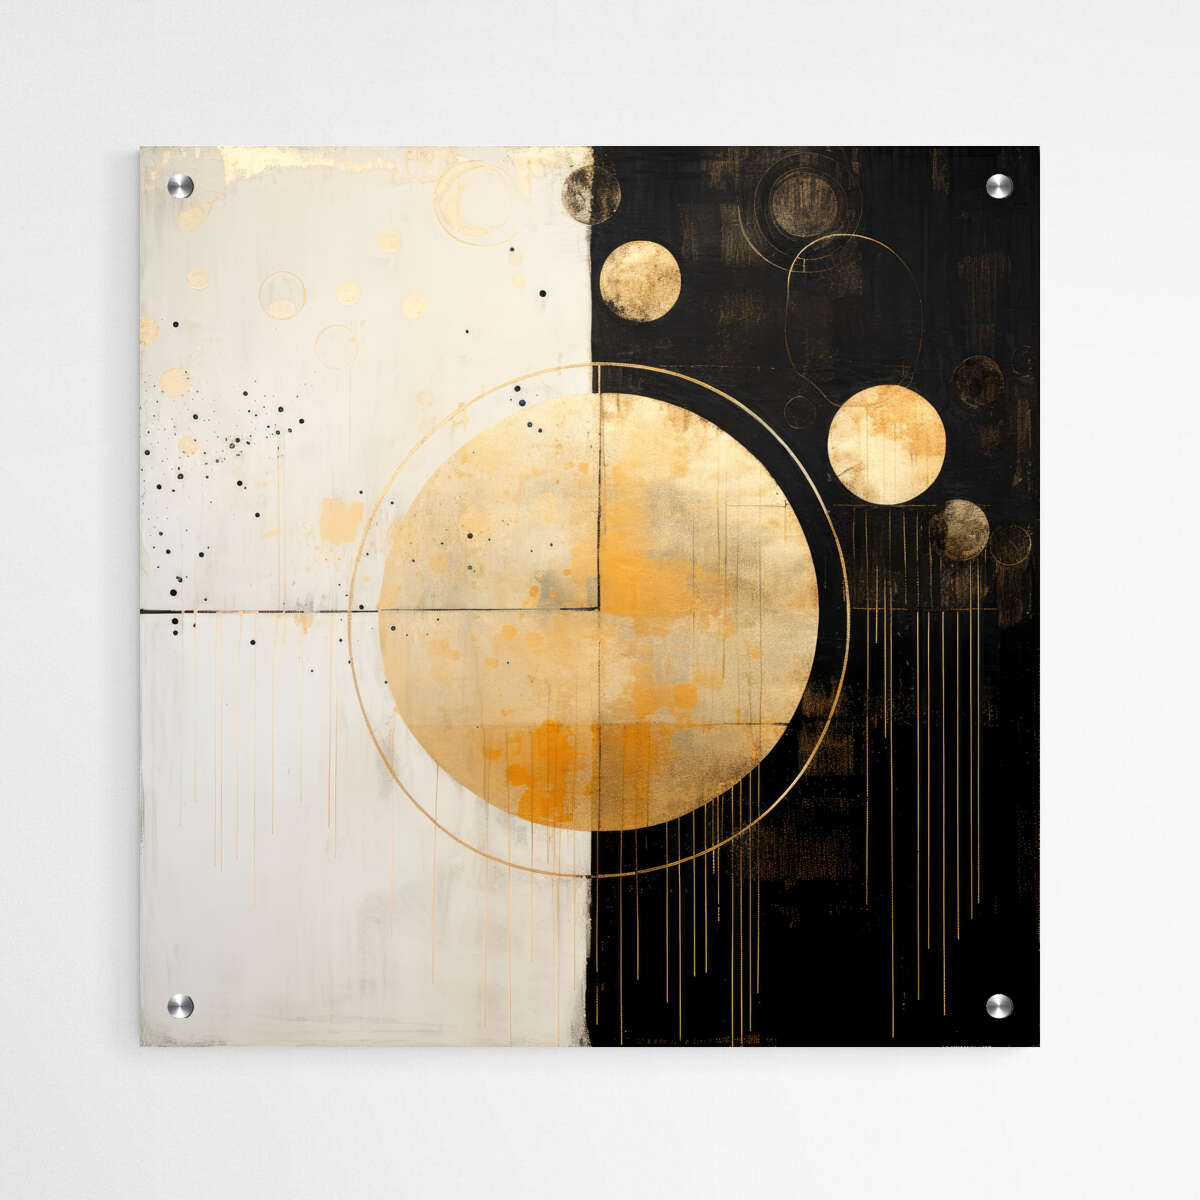 Sunprint Inspired Circles in Gold and Black | Abstract Wall Art Prints - The Canvas Hive